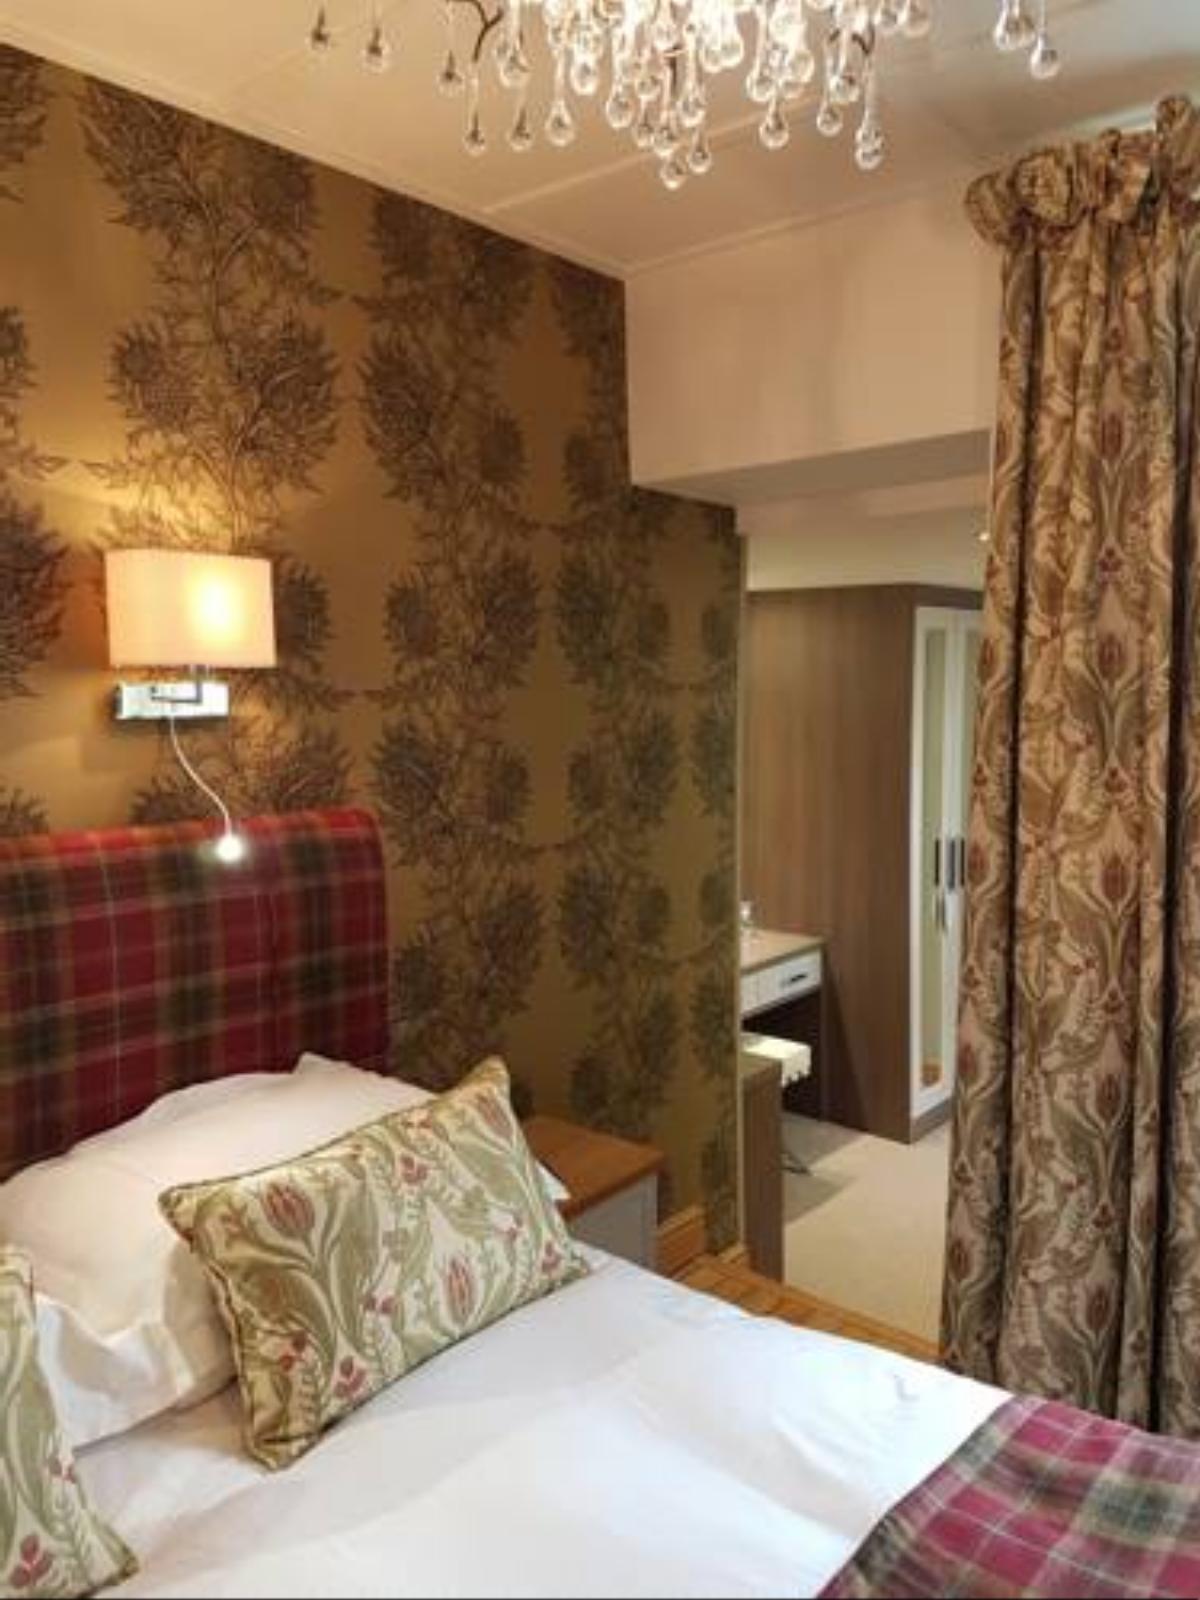 Croft Guesthouse Hotel Cockermouth United Kingdom